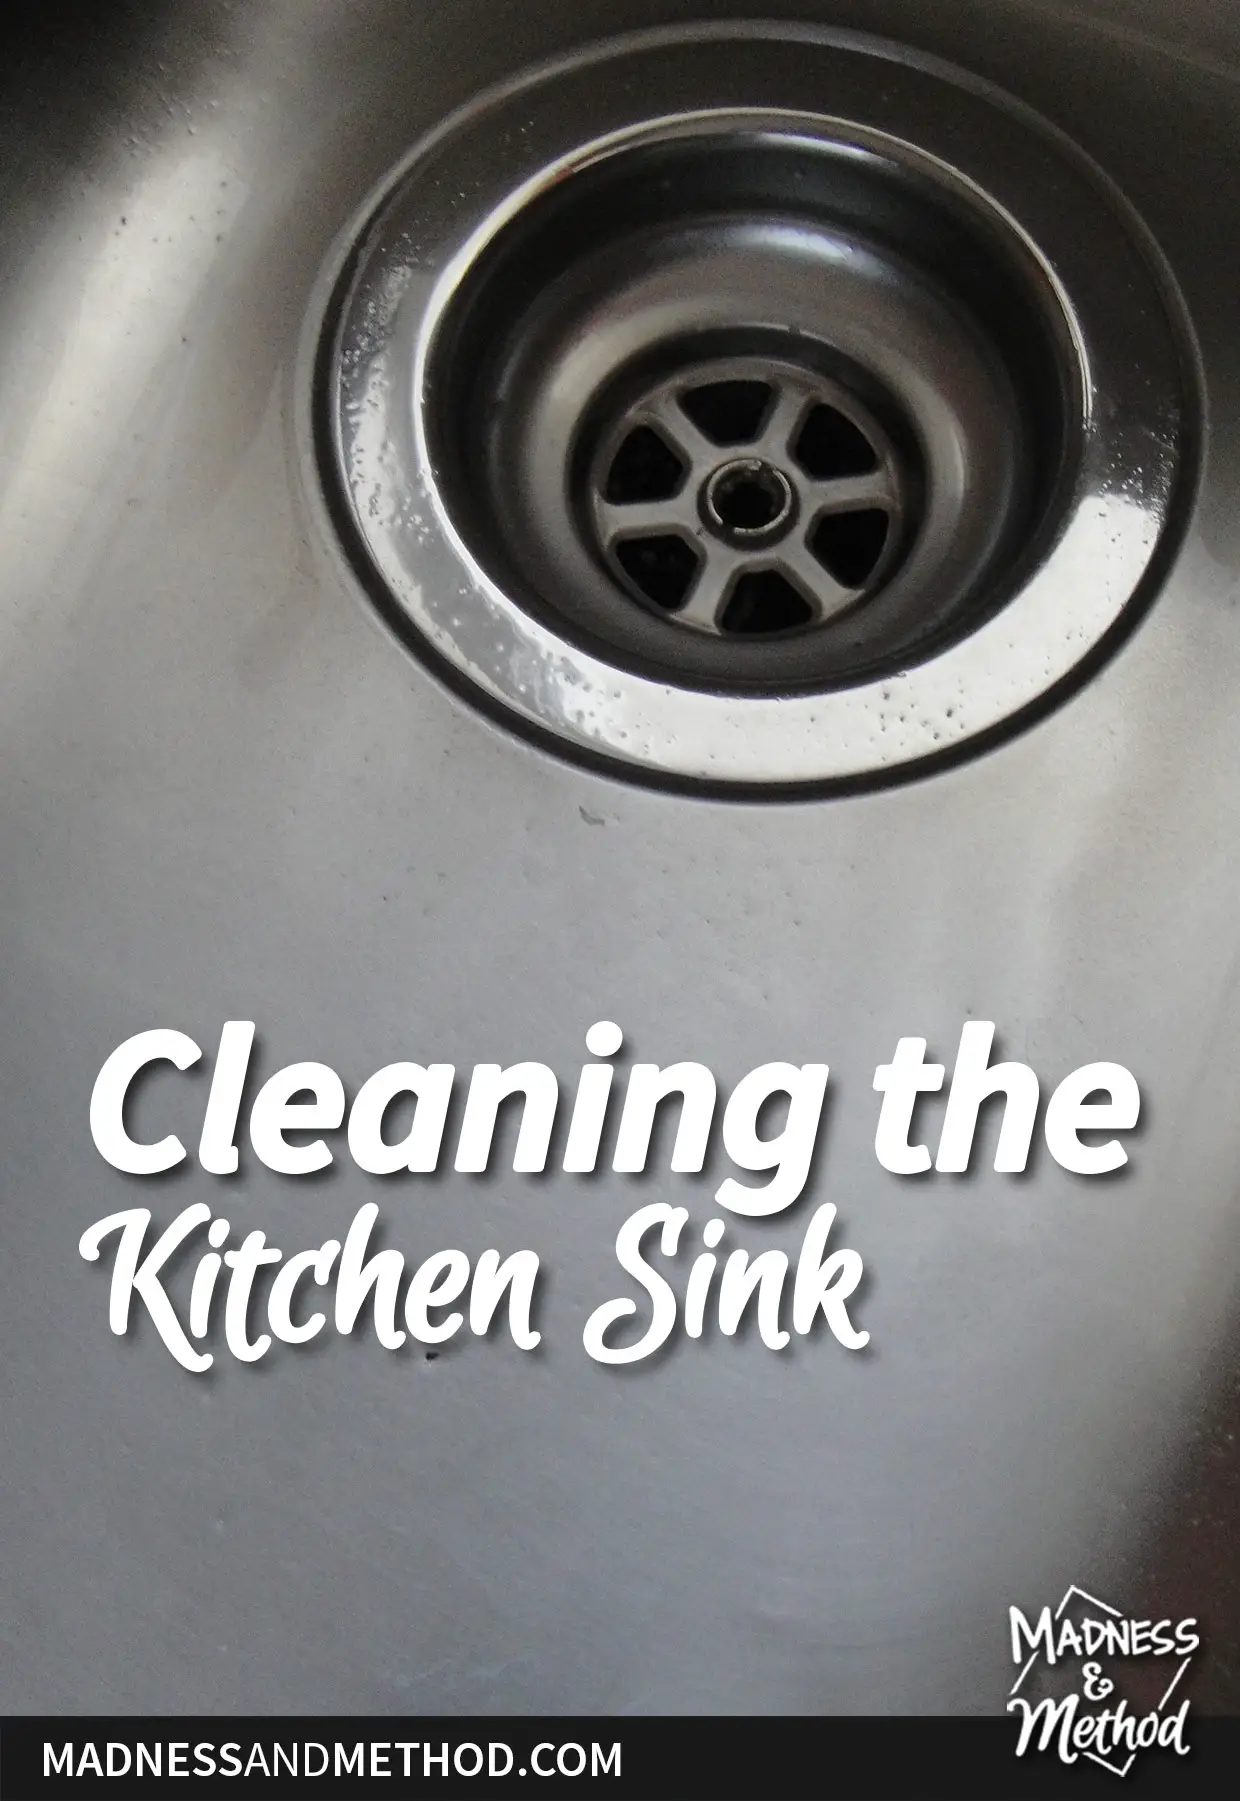 cleaning the kitchen sink text overlay on stainless steel sink drain